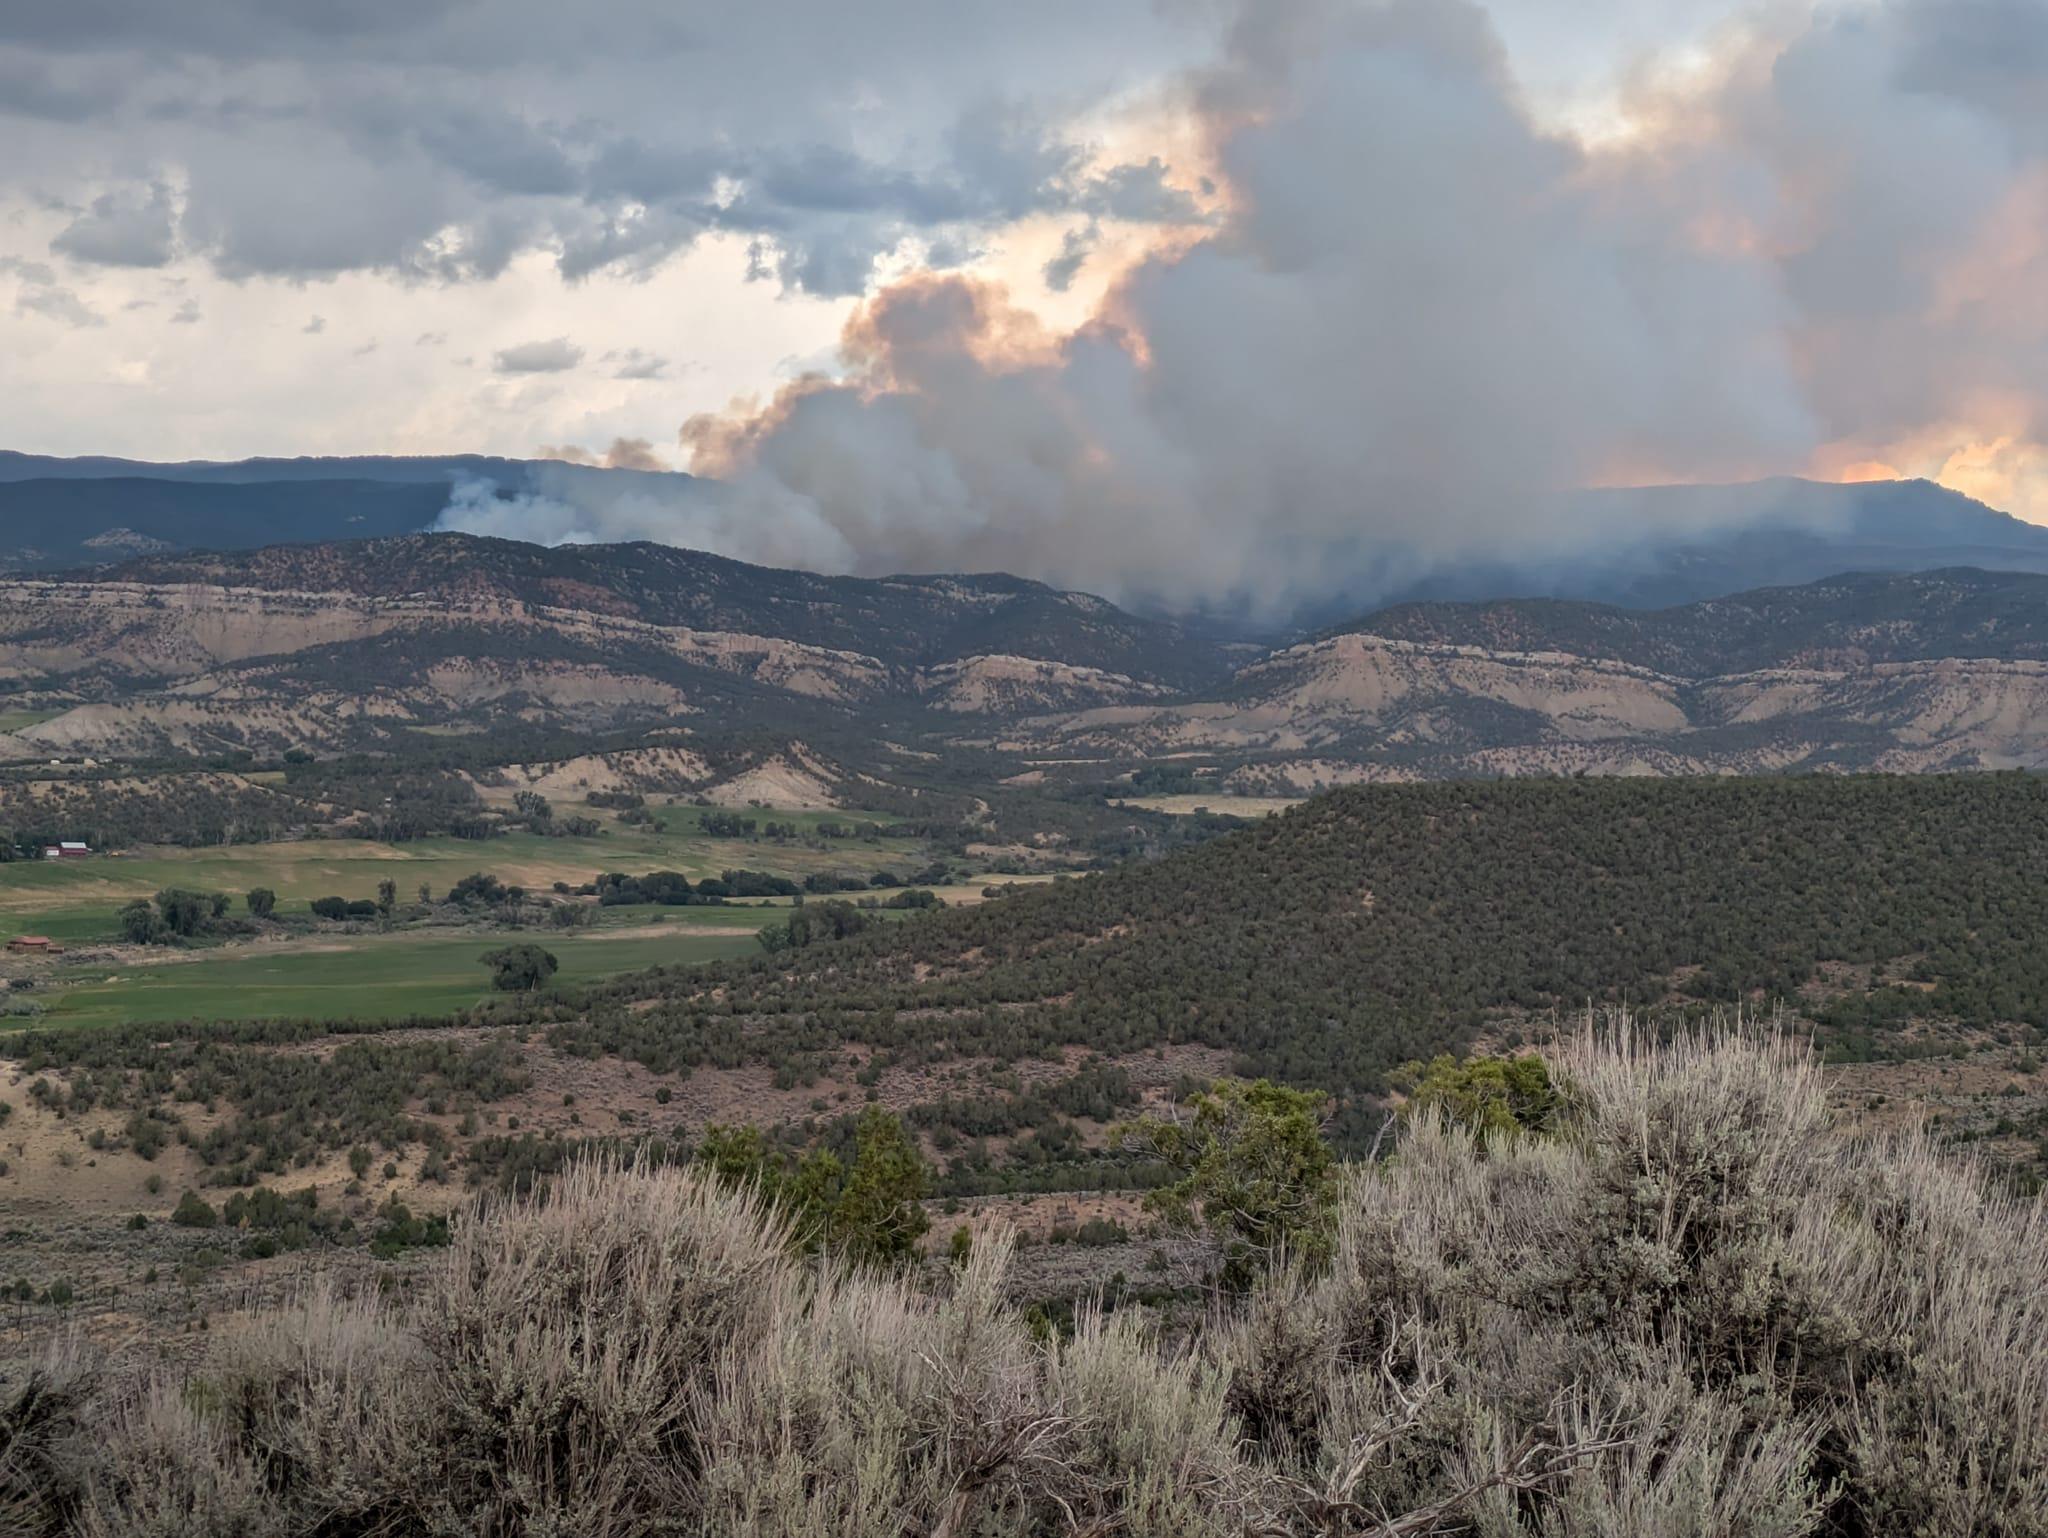 Photo of rolling high desert hills with a large plume of smoke rising up - Source: Debbie Williams Christner